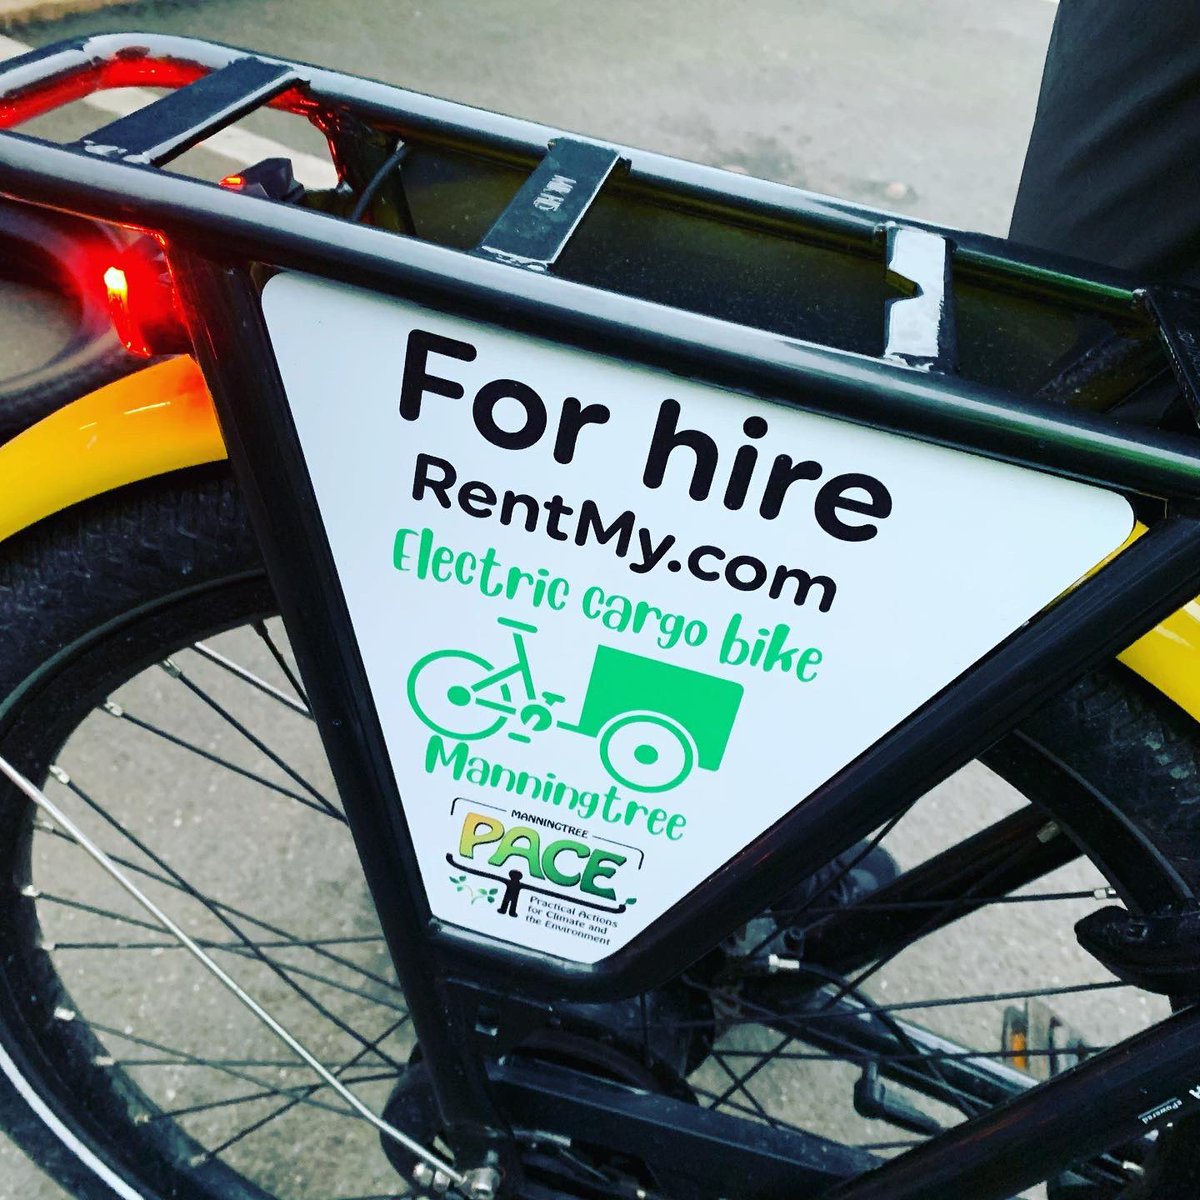 Flying visit from #cargobikemanningtree yesterday. You can rent their @RaleighBikes_UK #stride2 via @RentMycom - go on, give them a go. 
For Colchester deliveries/collections call on us! #ecargobikedeliveries #broughtbybike #cargobikeaction #letsgo